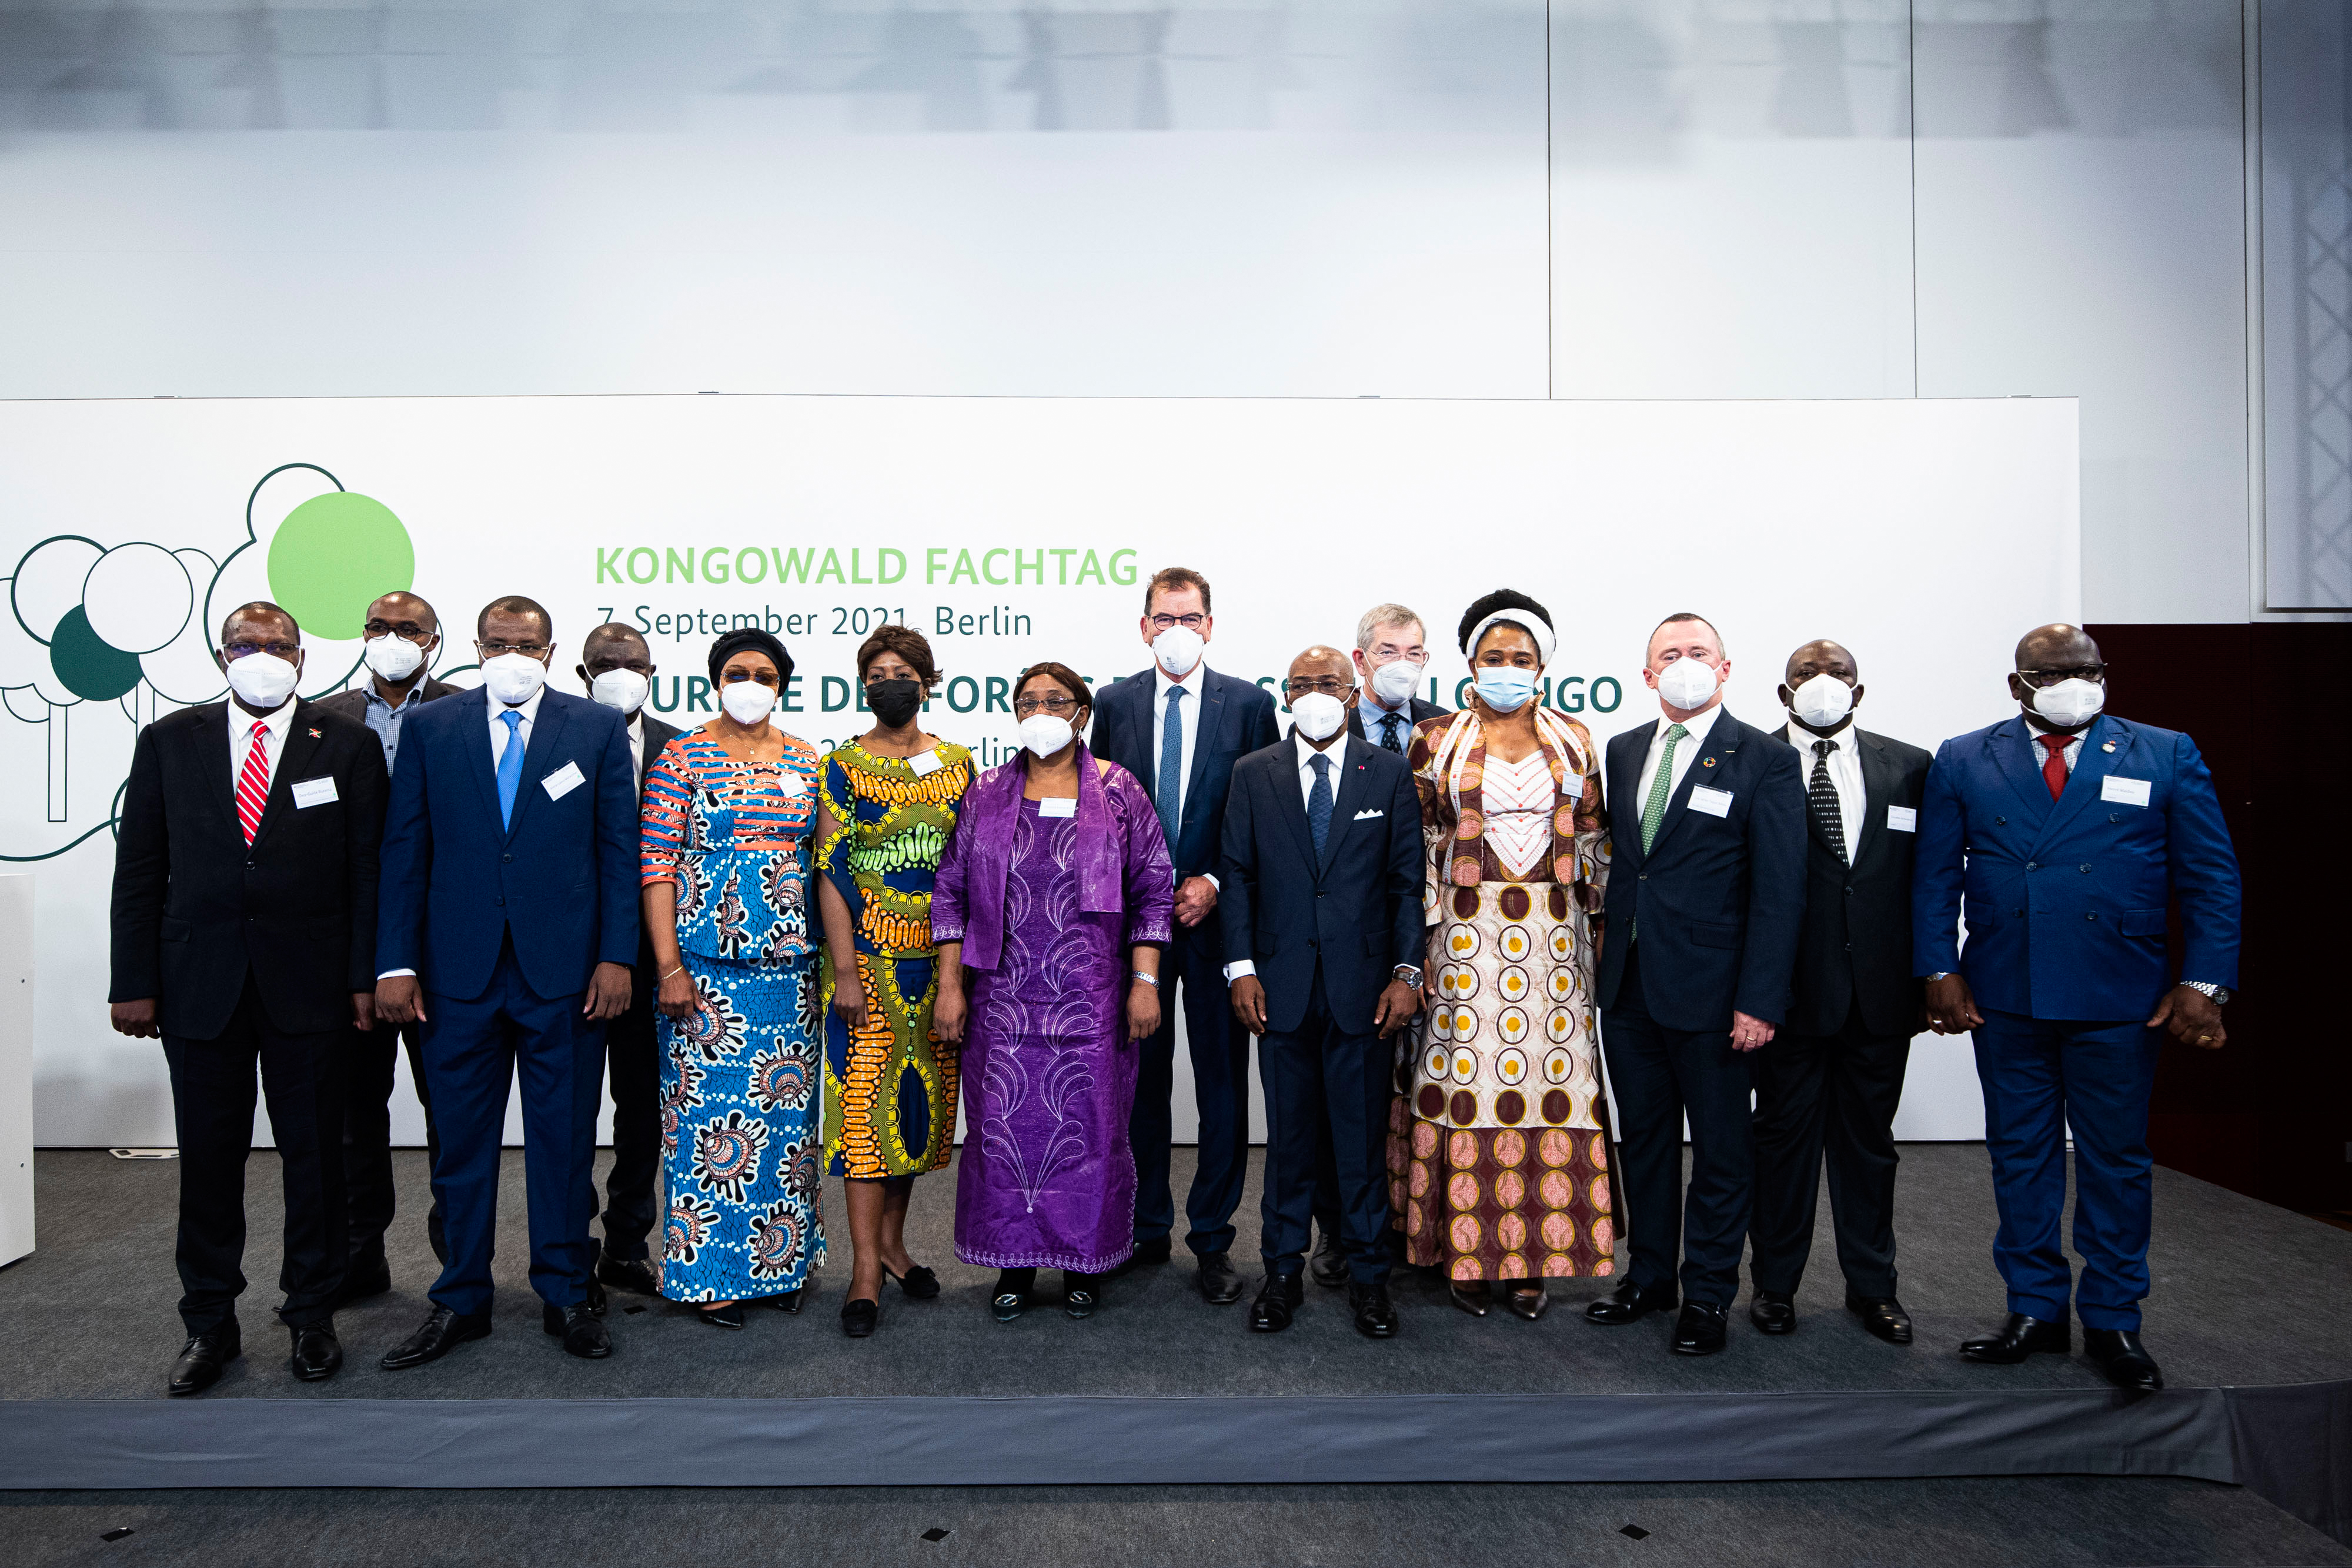 Representatives of the Congo Basin countries with Federal Development Minister Gerd Müller at the signing of the Declaration on the Protection of the Rainforest in Berlin